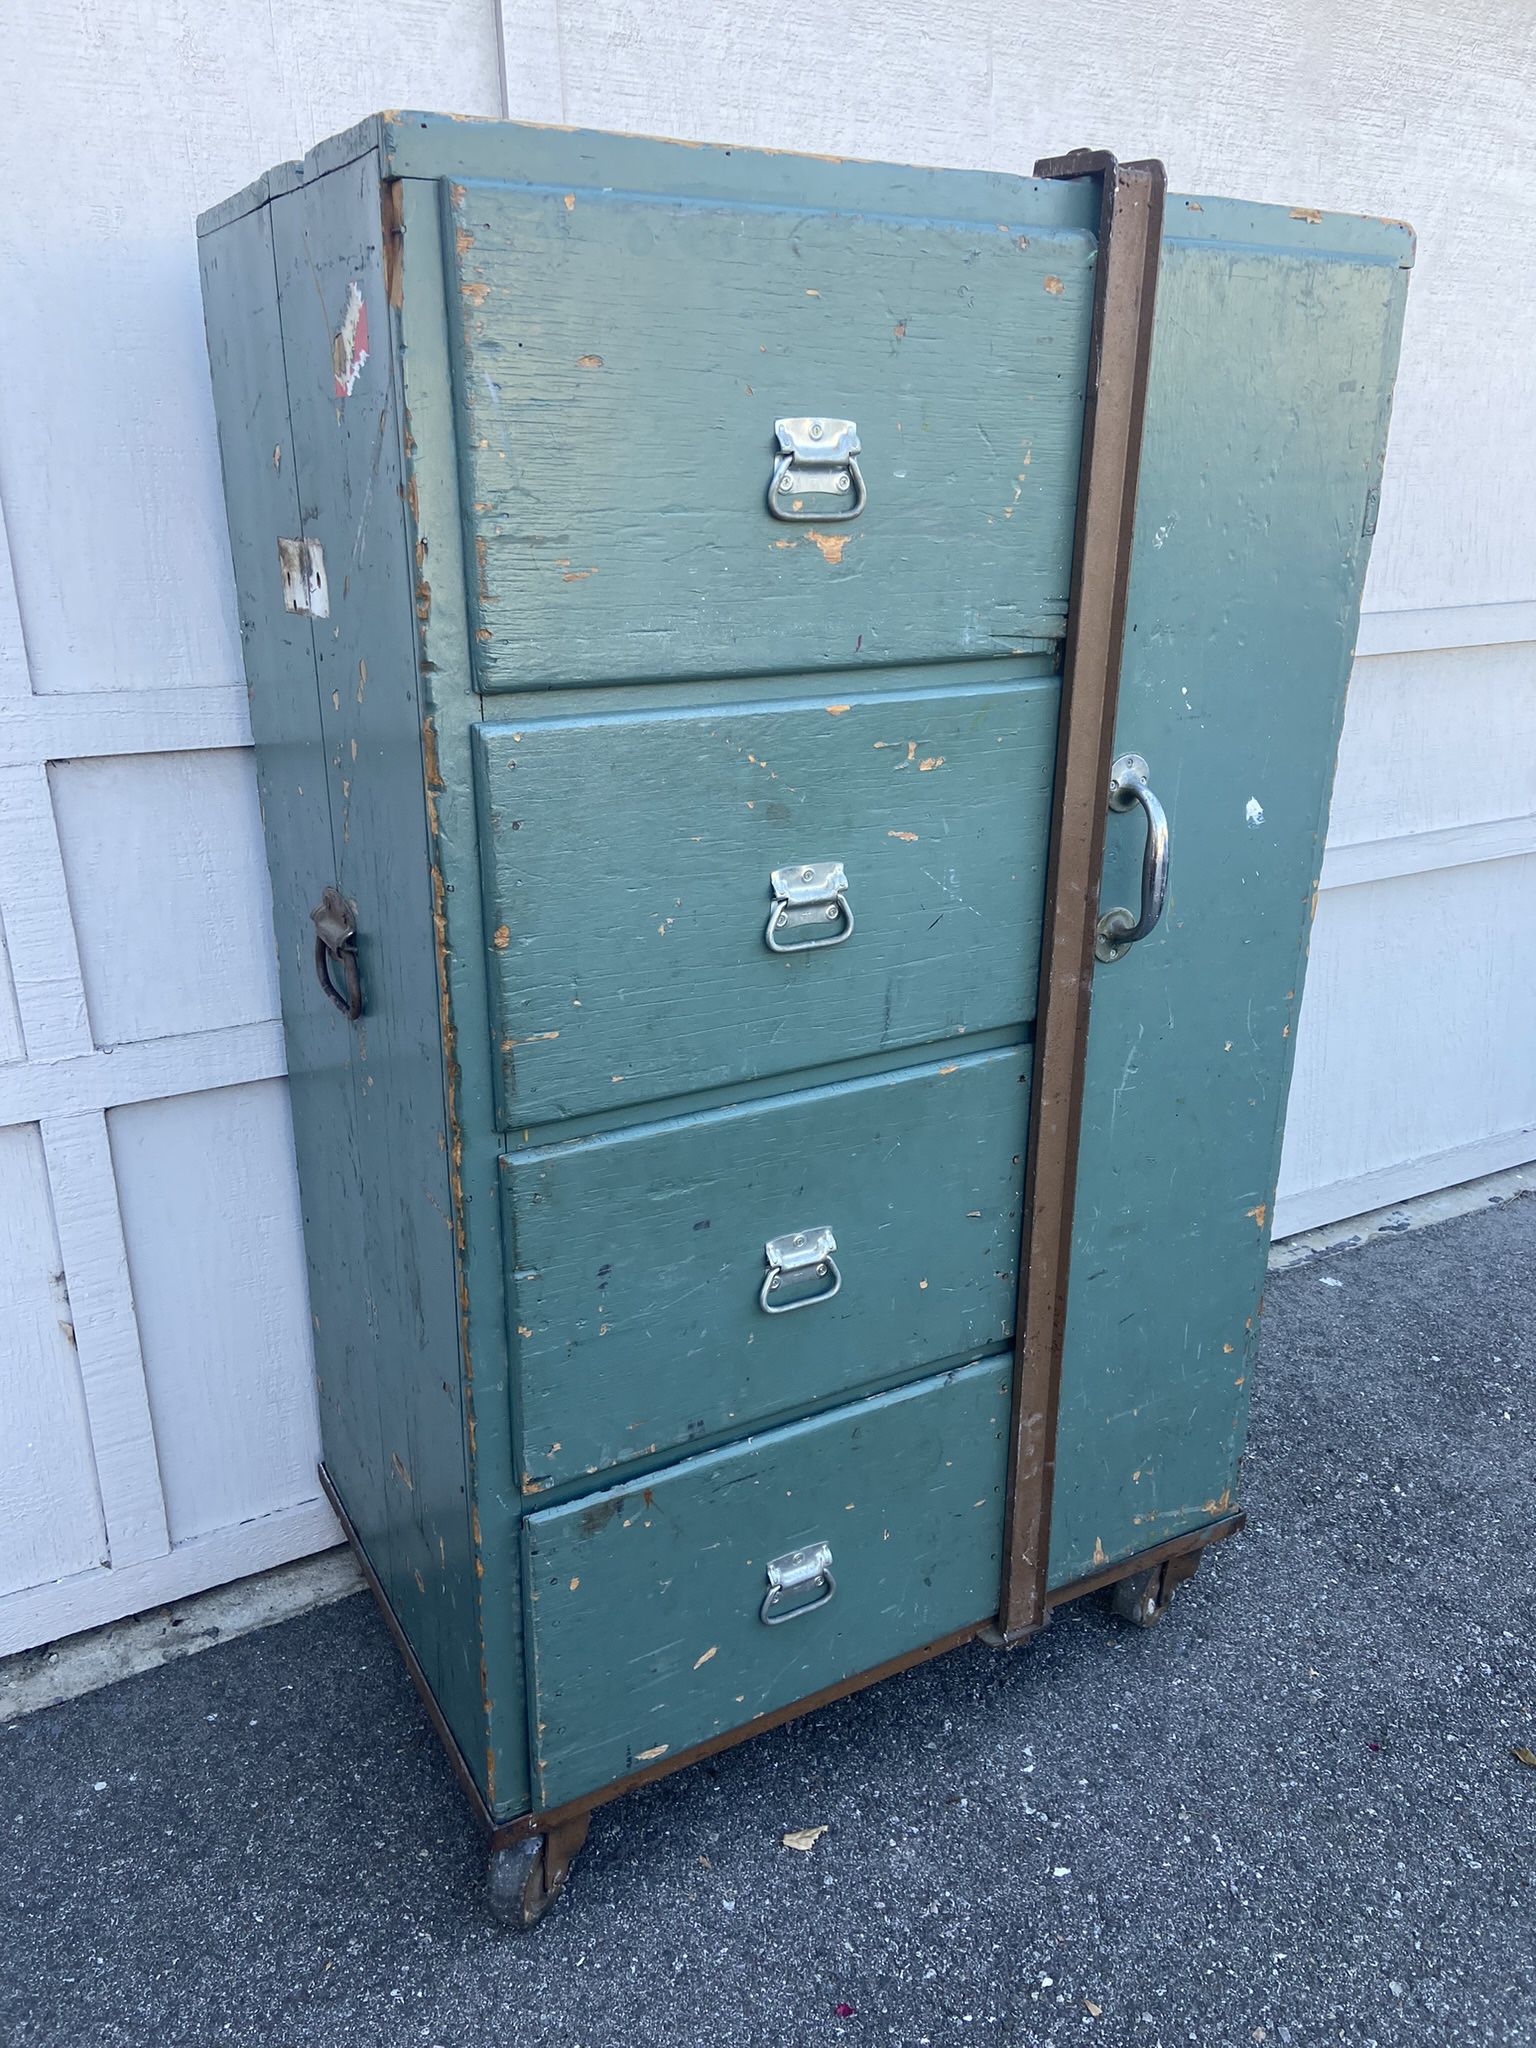 Vintage Storage Chest Of Drawers / Closet On Casters 